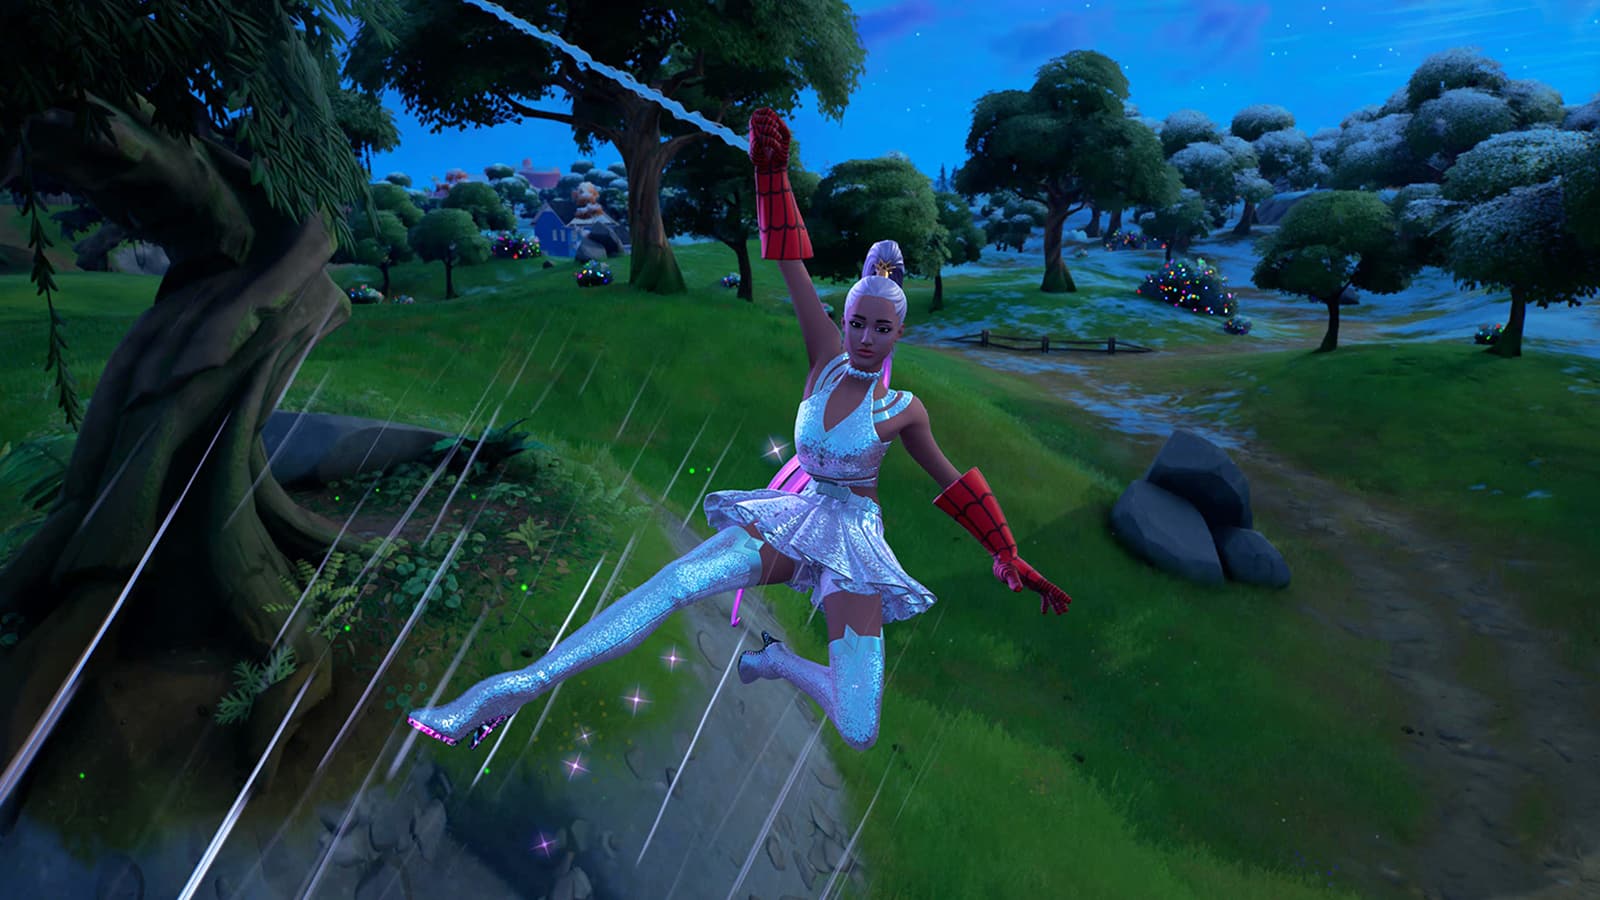 An image showing the Ariana Grande skin web slinging through Fortnite with Spider-Man's Web-Shooters